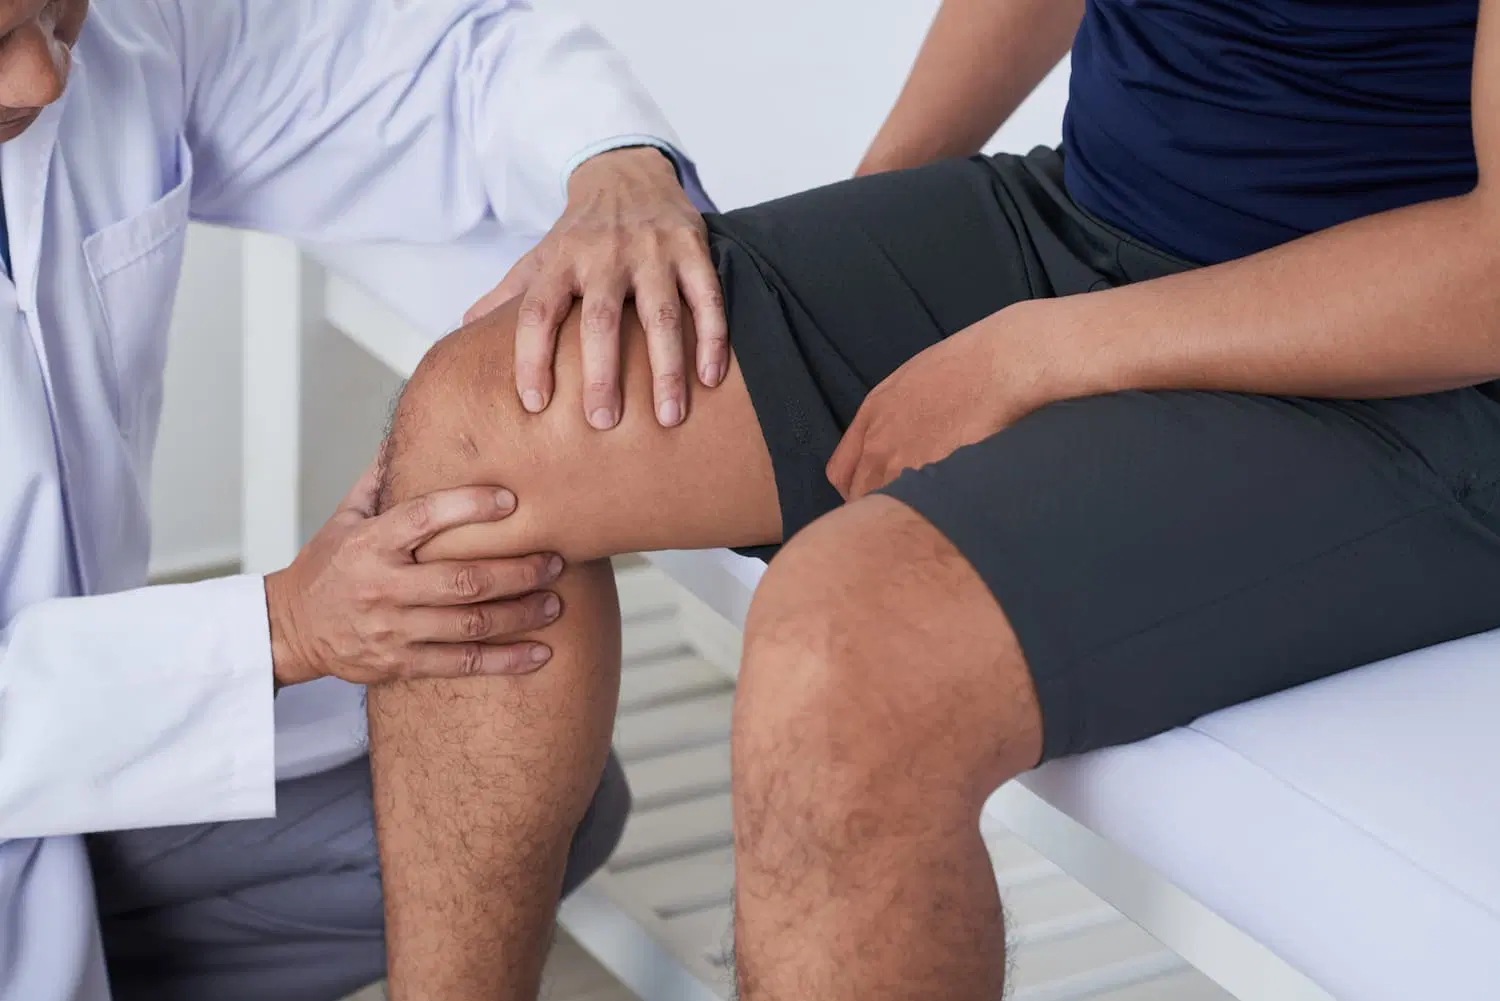 Treating Knee Injuries From Sprains To ACL Tears